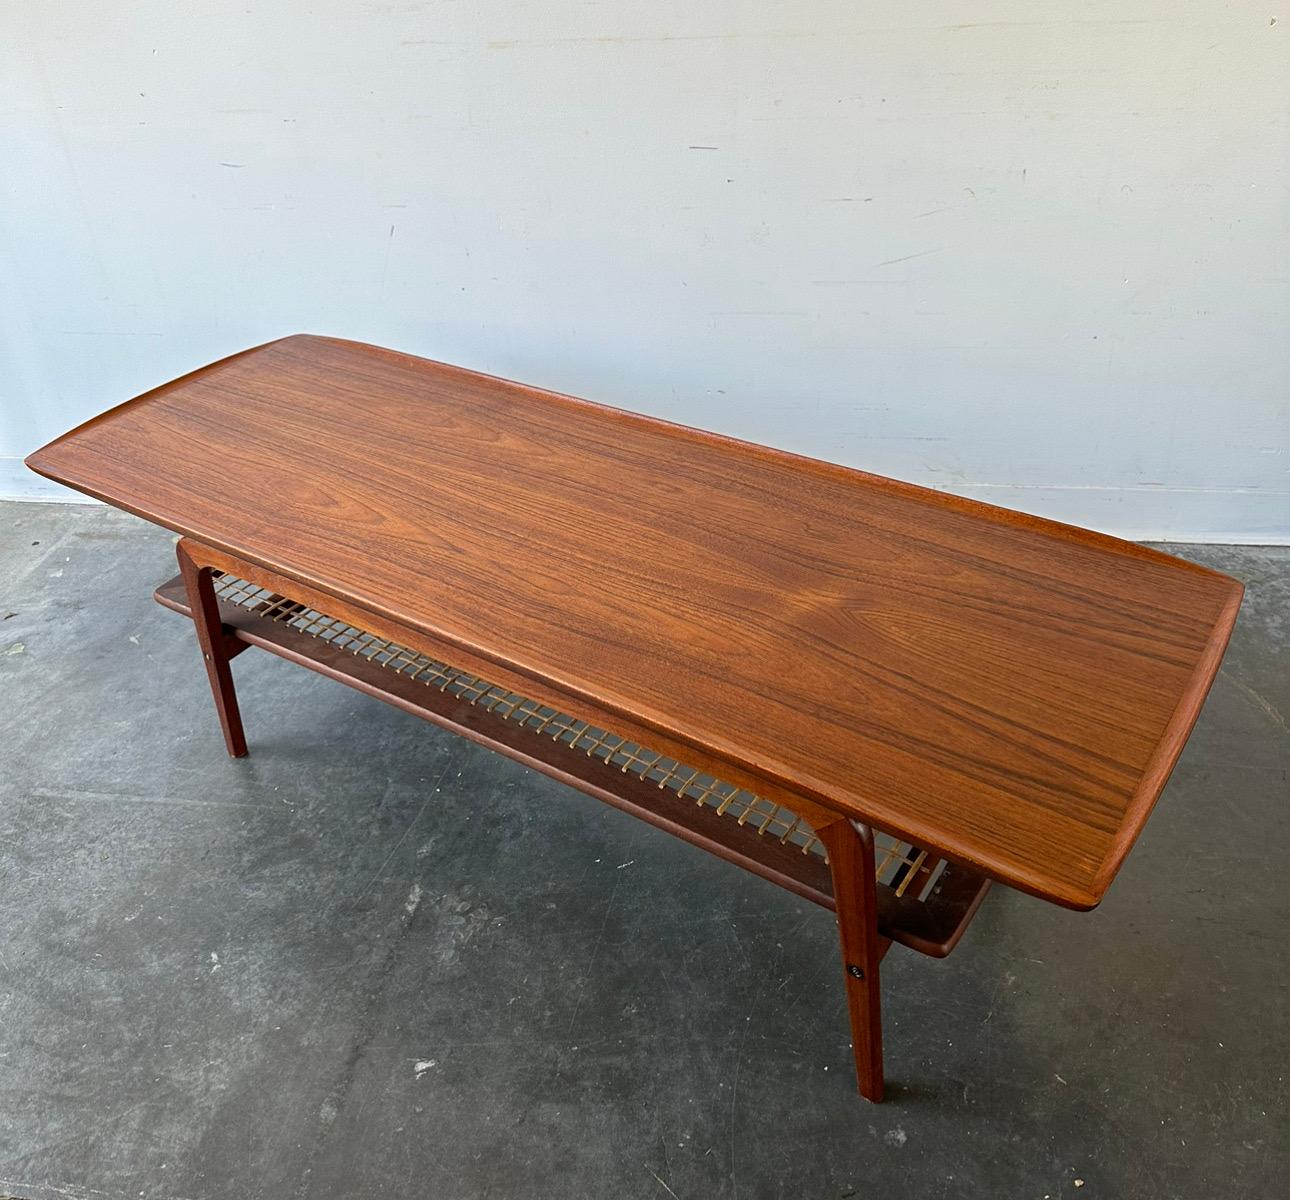 Arne Hovmand-Olsen Mid-Century Modern Coffee Table

Outstanding danish teak surfboard style coffee table with original cane shelf. The piece has been restored minus the shelf which is original, the cane has some
Light breaking at the edges.

